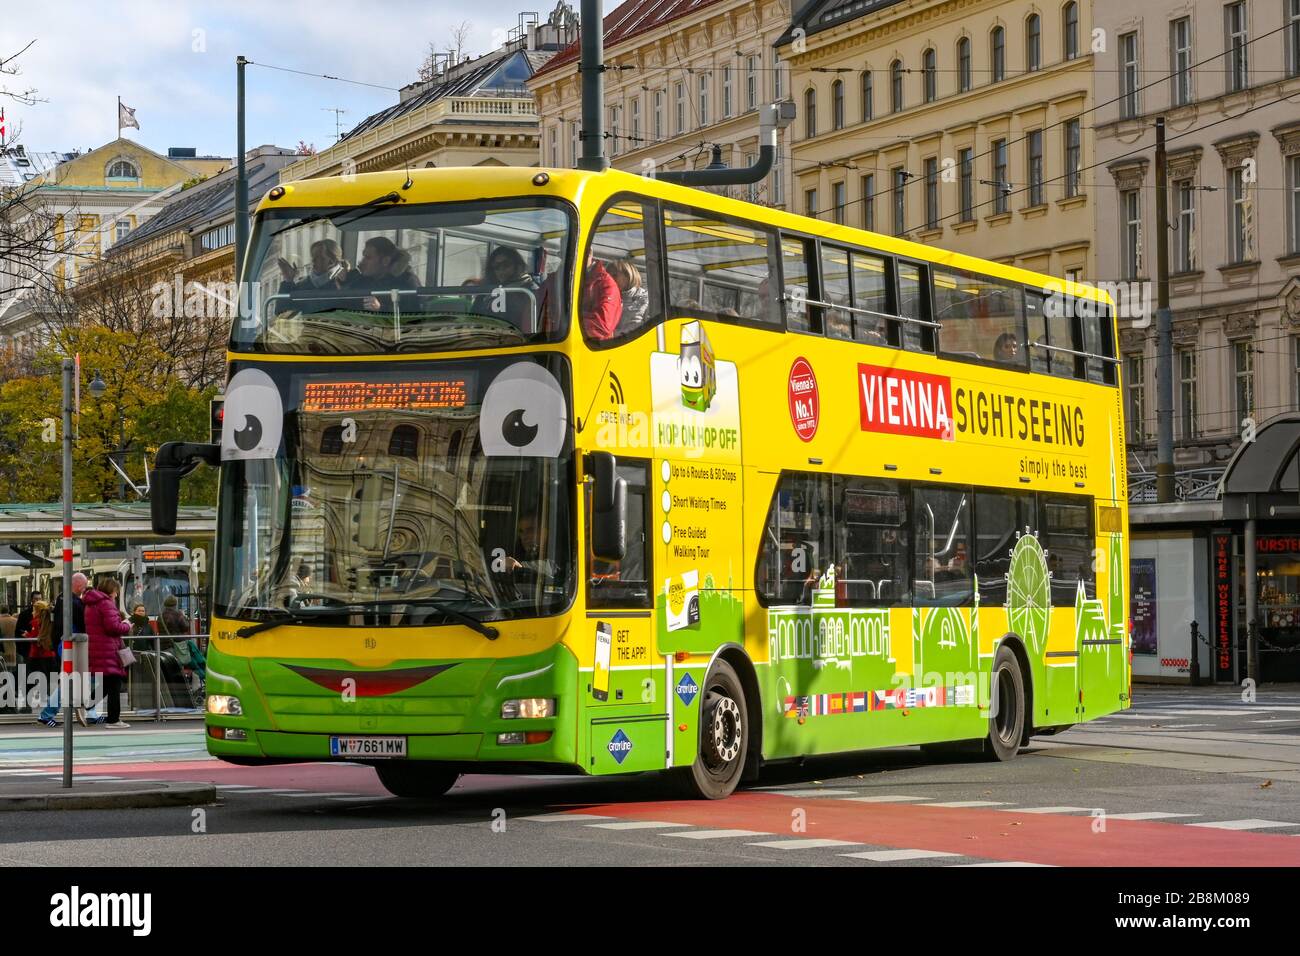 VIENNA, AUSTRIA - NOVEMBER 2019: Double deck tourist bus operated by Vienna Sightseeing driving in Vienna city centre Stock Photo